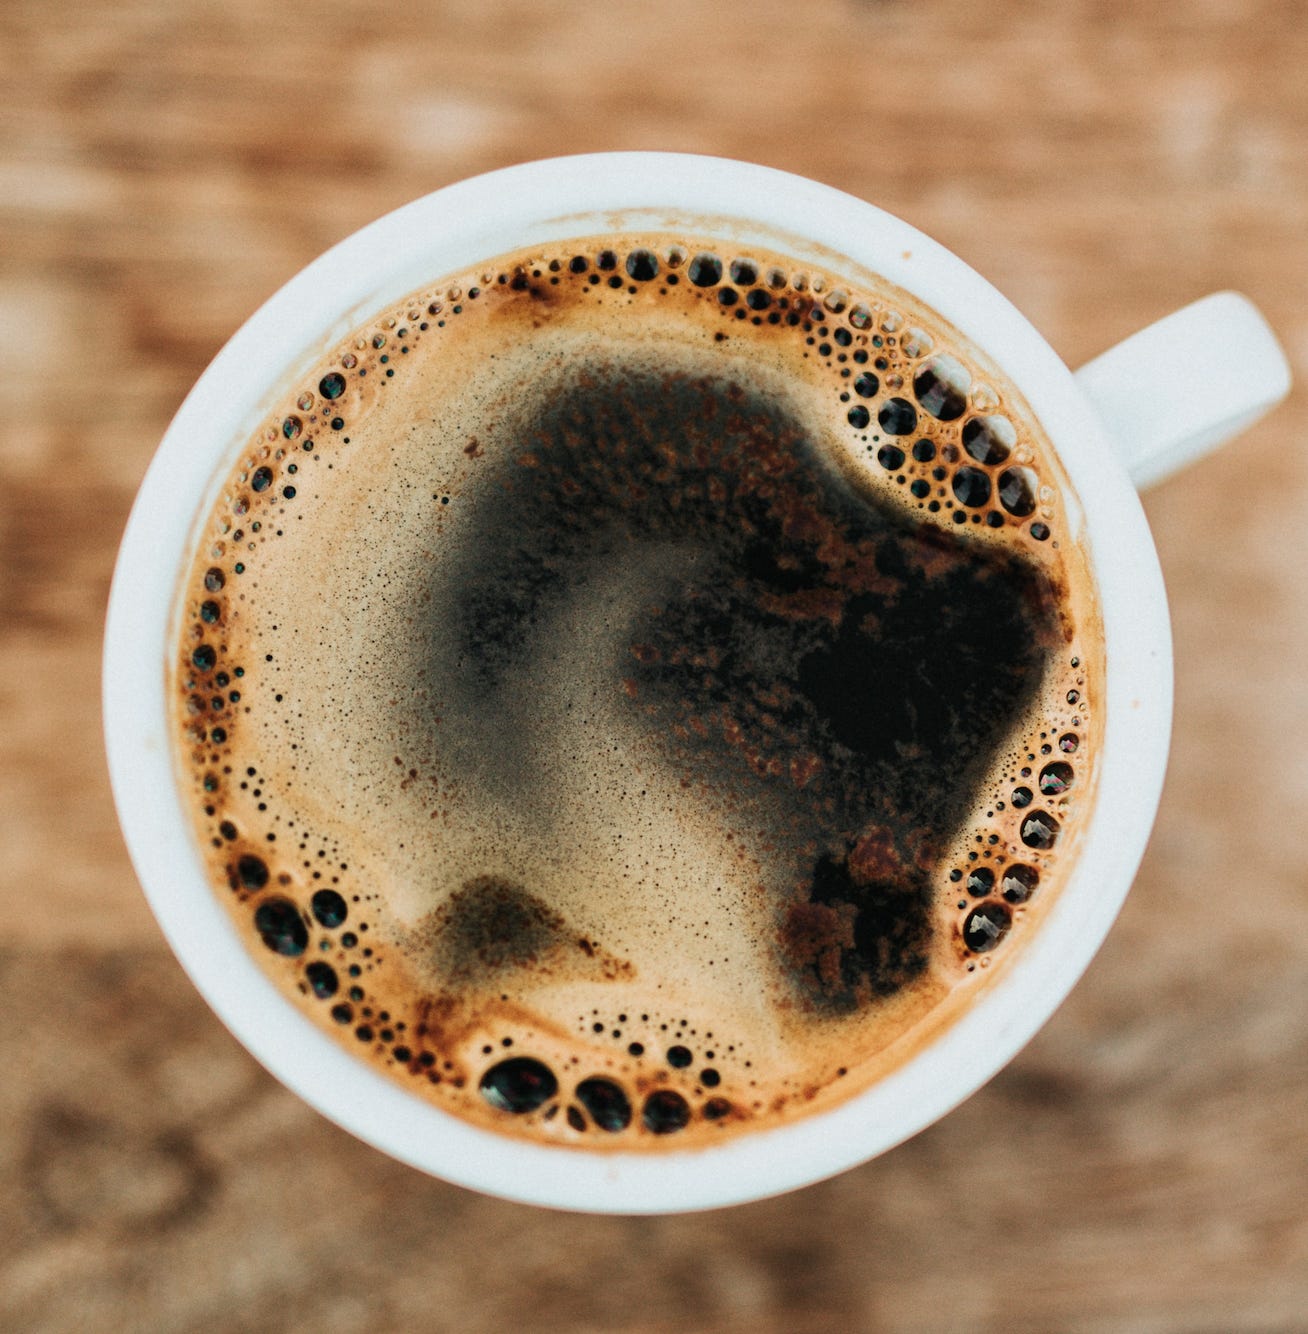 On overhead view of a black coffee in a white ceramic coffee mug resting on a blurred wood countertop.